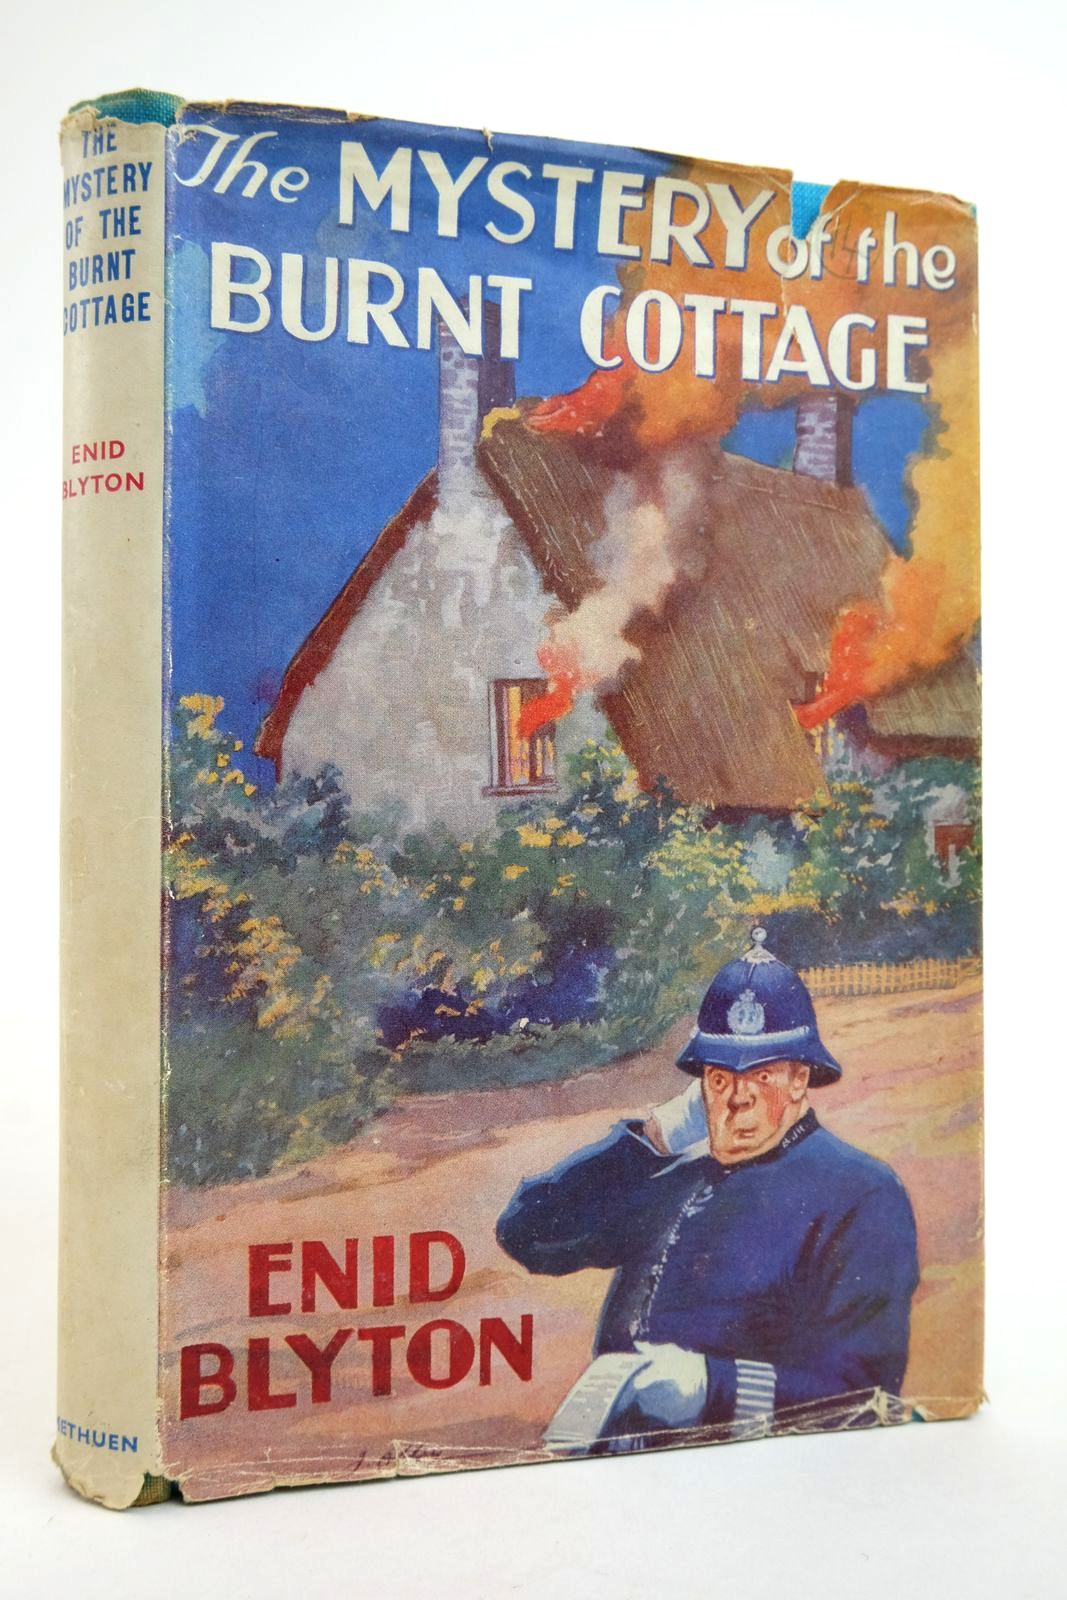 Photo of THE MYSTERY OF THE BURNT COTTAGE written by Blyton, Enid illustrated by Abbey, J. published by Methuen & Co. Ltd. (STOCK CODE: 2135594)  for sale by Stella & Rose's Books